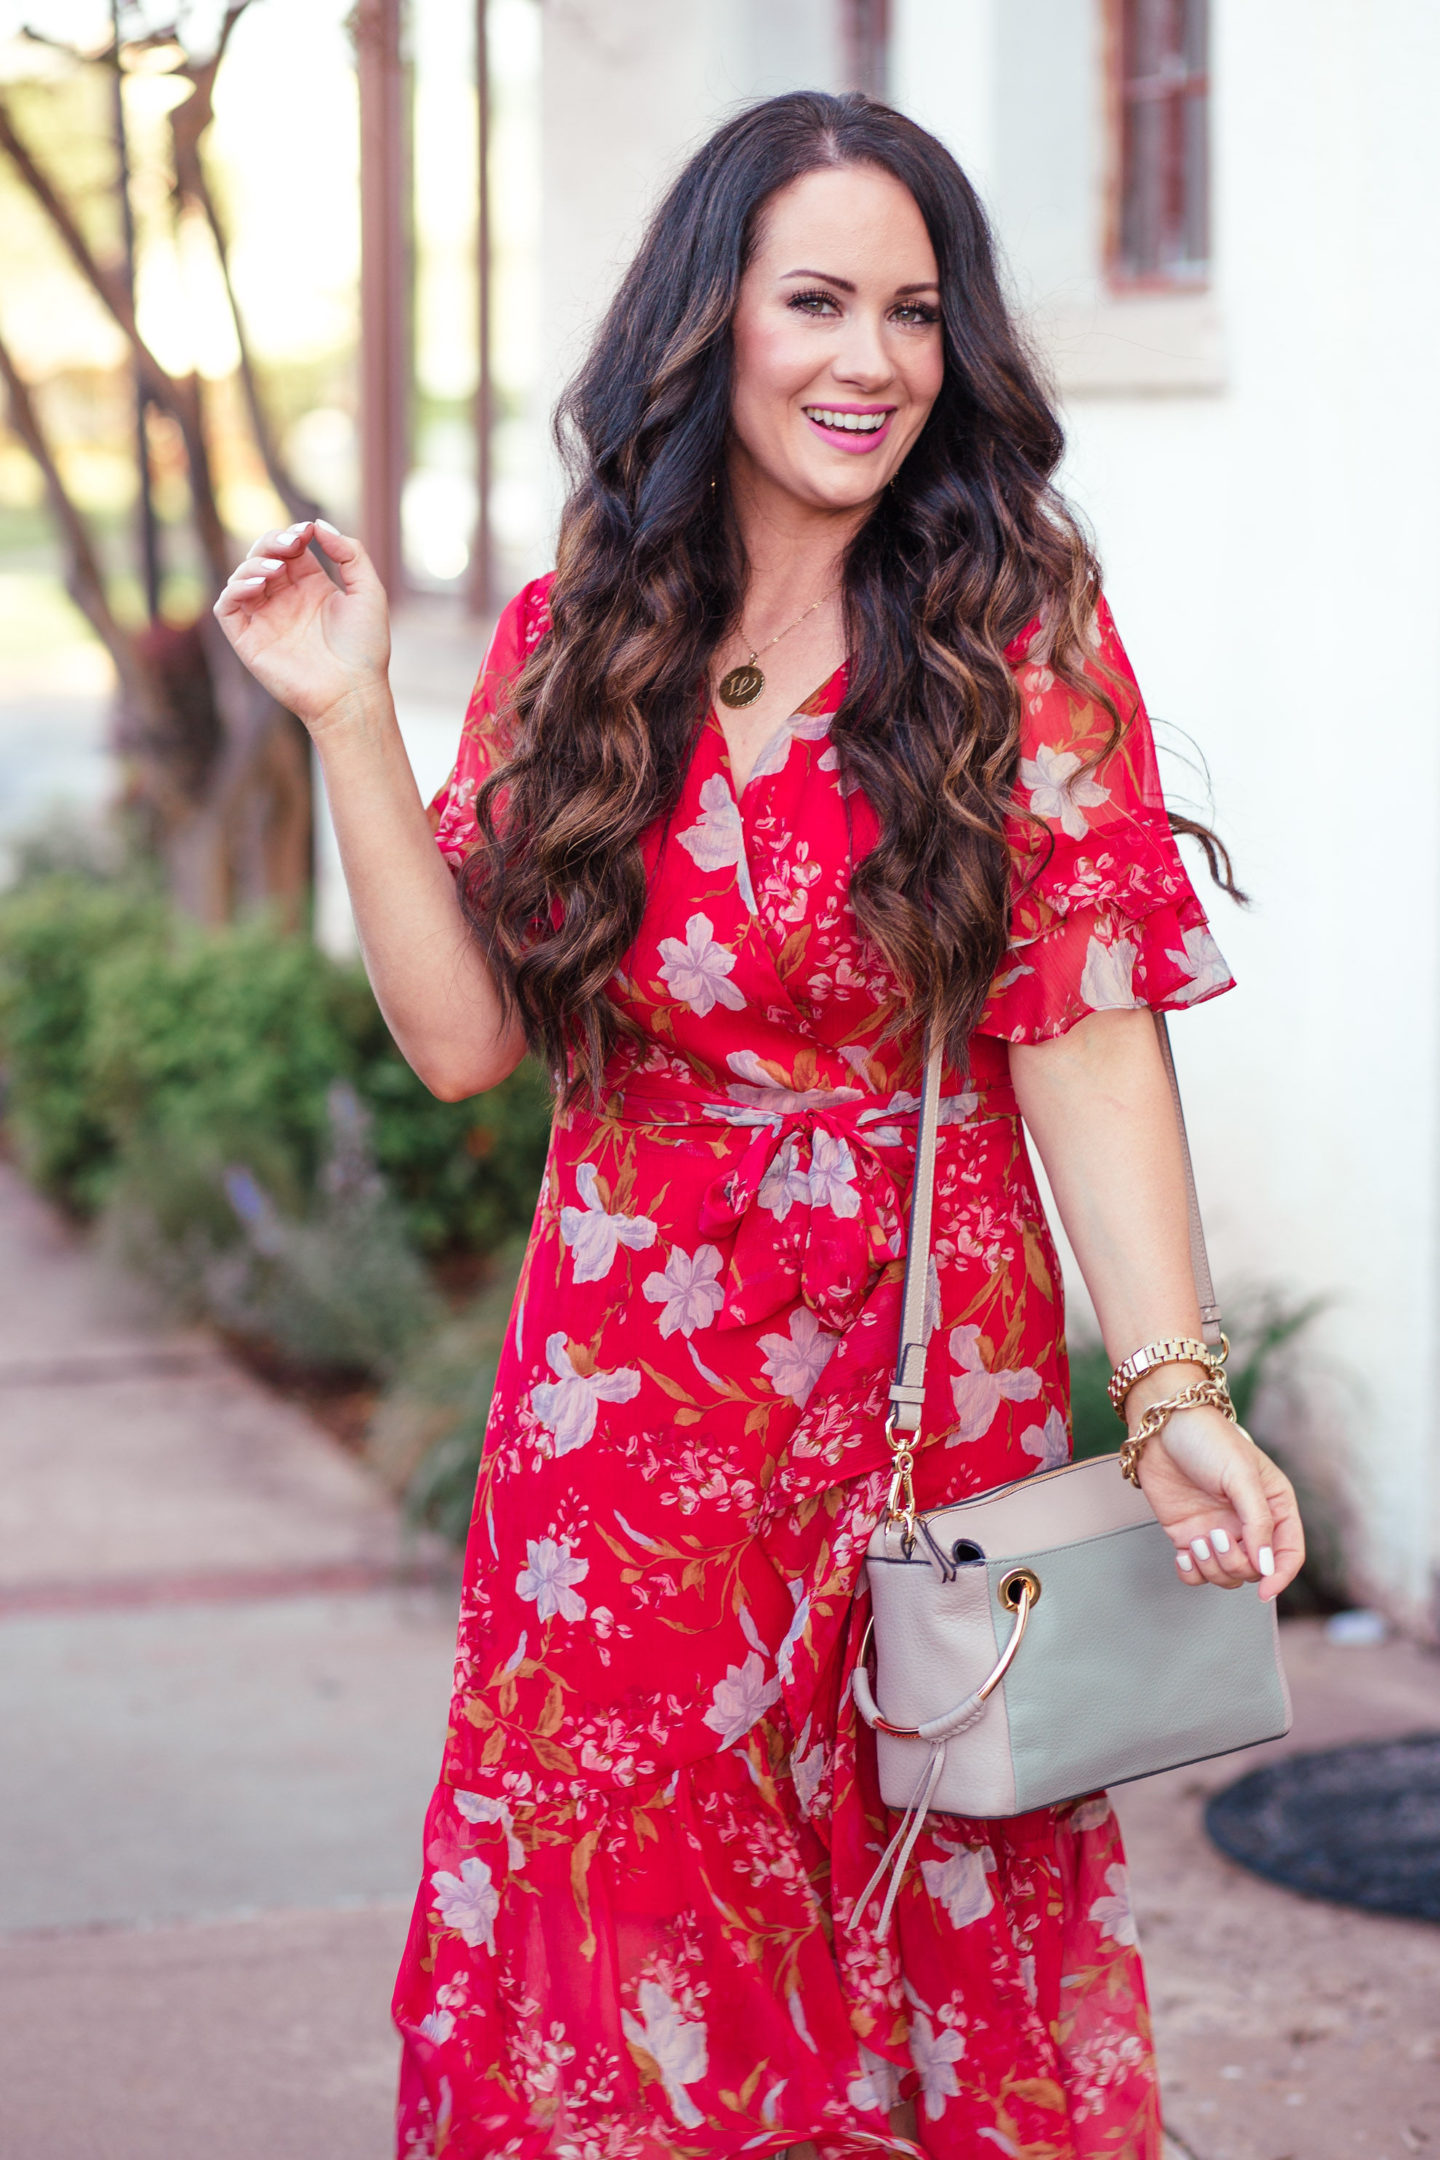 Perfect Summer Dresses + Life Lately - The Double Take Girls